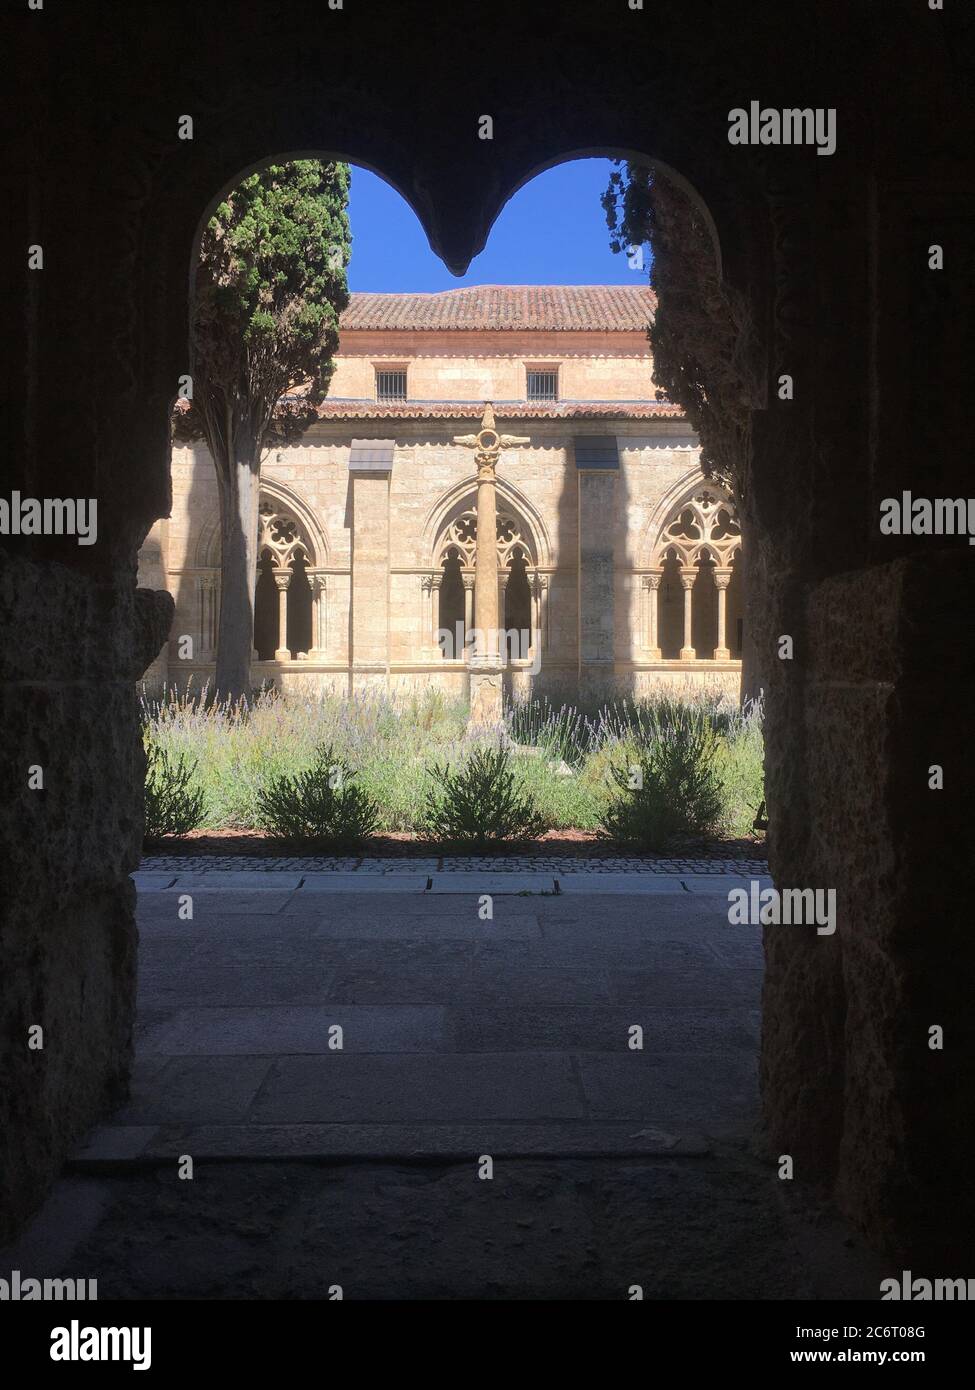 cloister of the cathedral of Ciudad Rodrigo in late Romanesque style Stock Photo